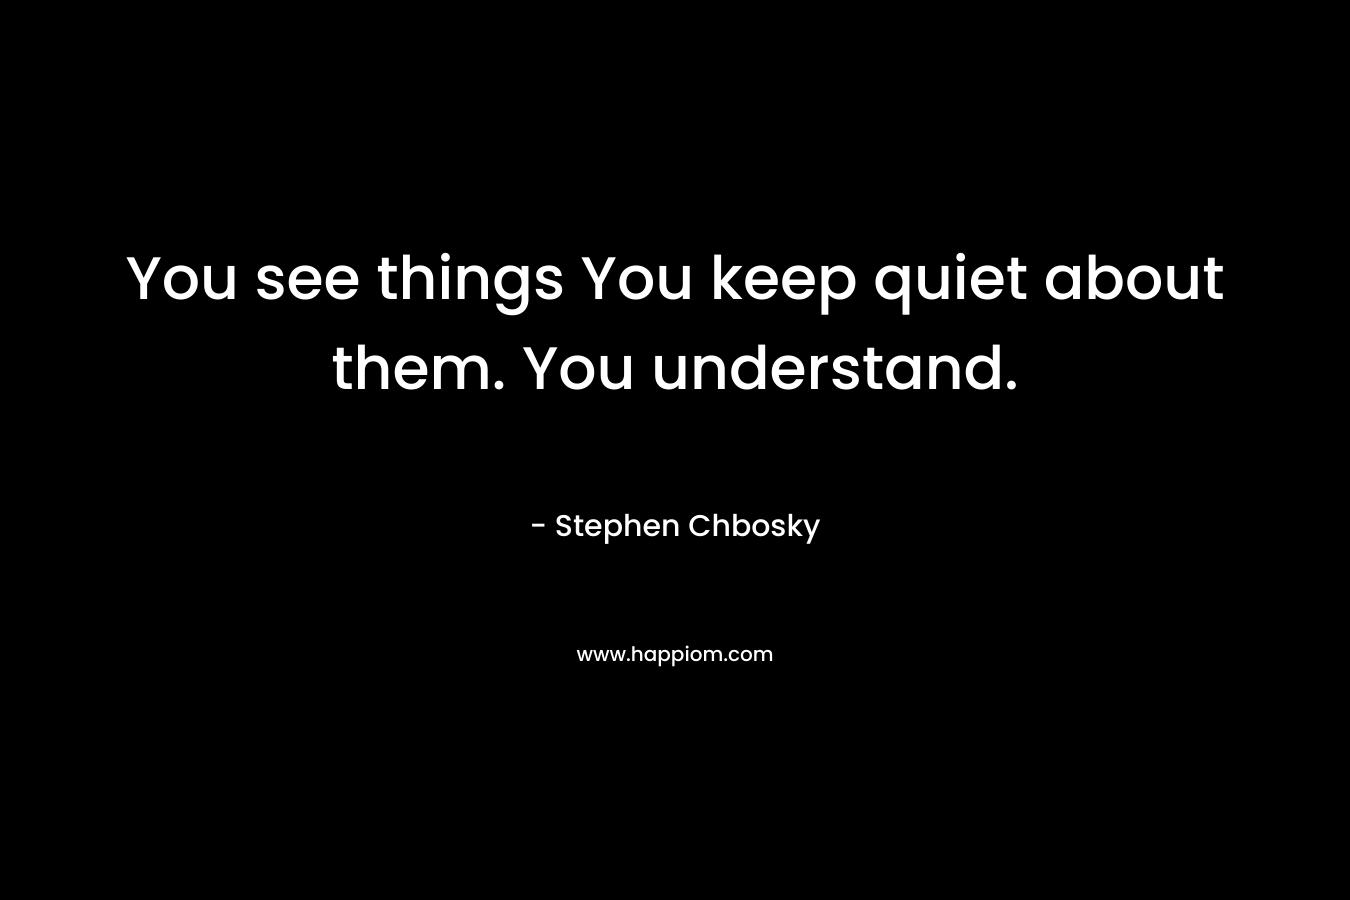 You see things You keep quiet about them. You understand.